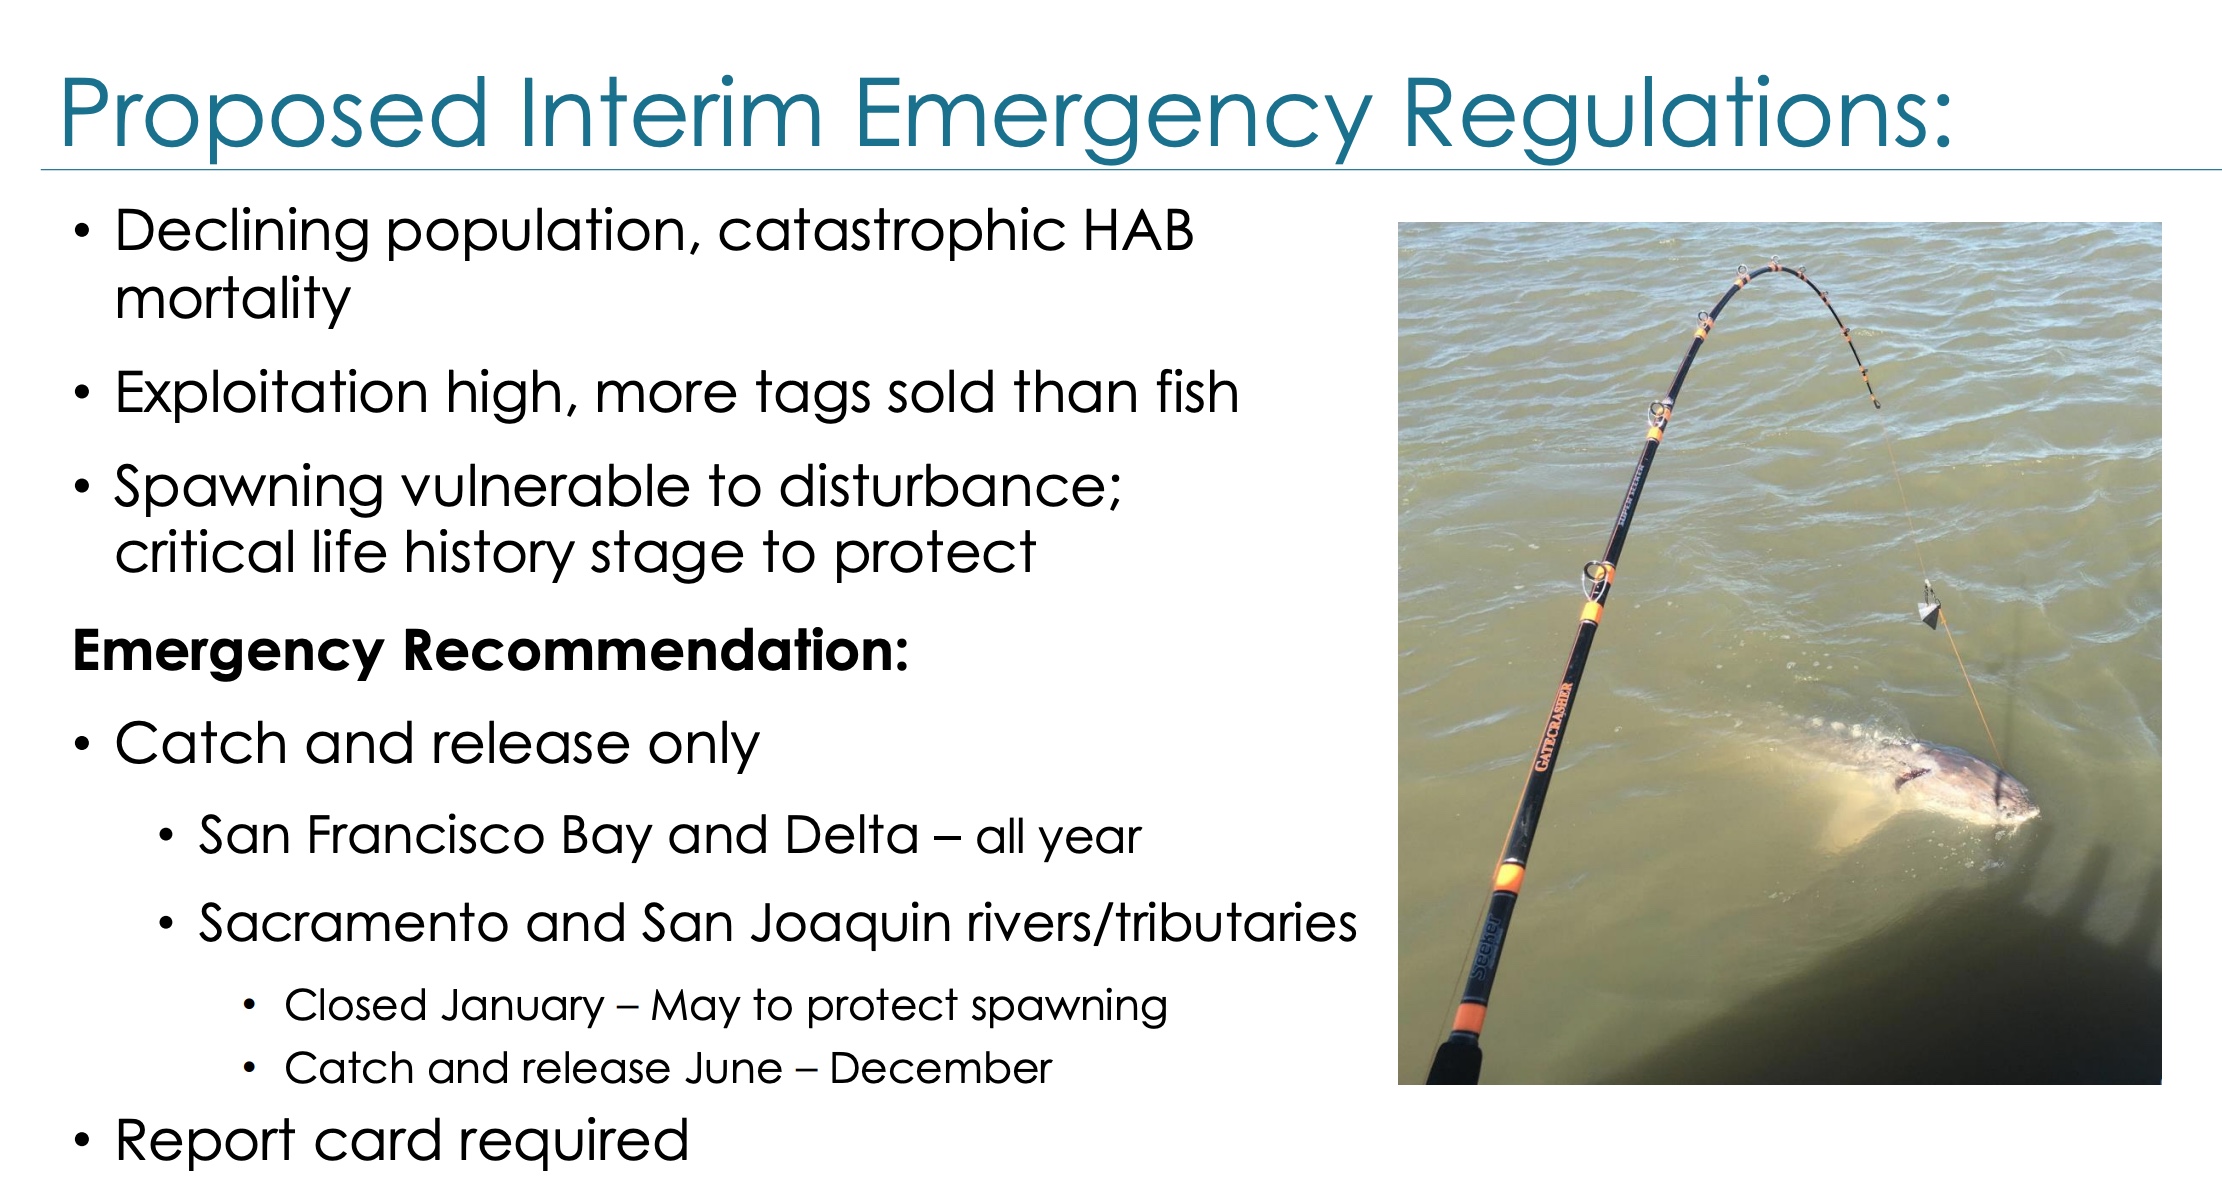 Recommendations for emergency white sturgeon regulations to be presented  during the October 11-12 Fish and Game Commission meeting